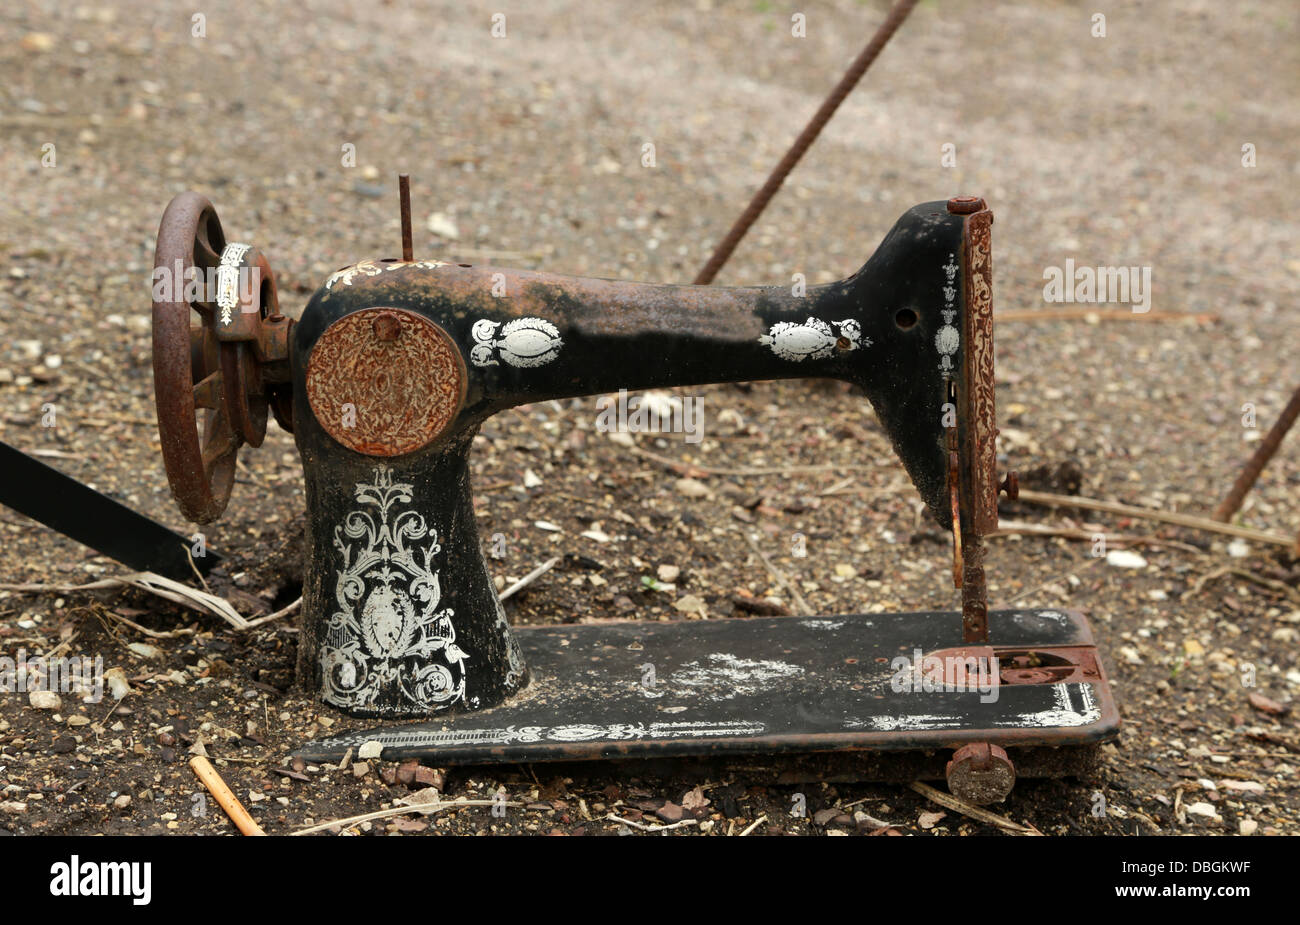 male pattern boldness: Sewing Machines on Craigslist: The Good, The Bad,  and the Rusty